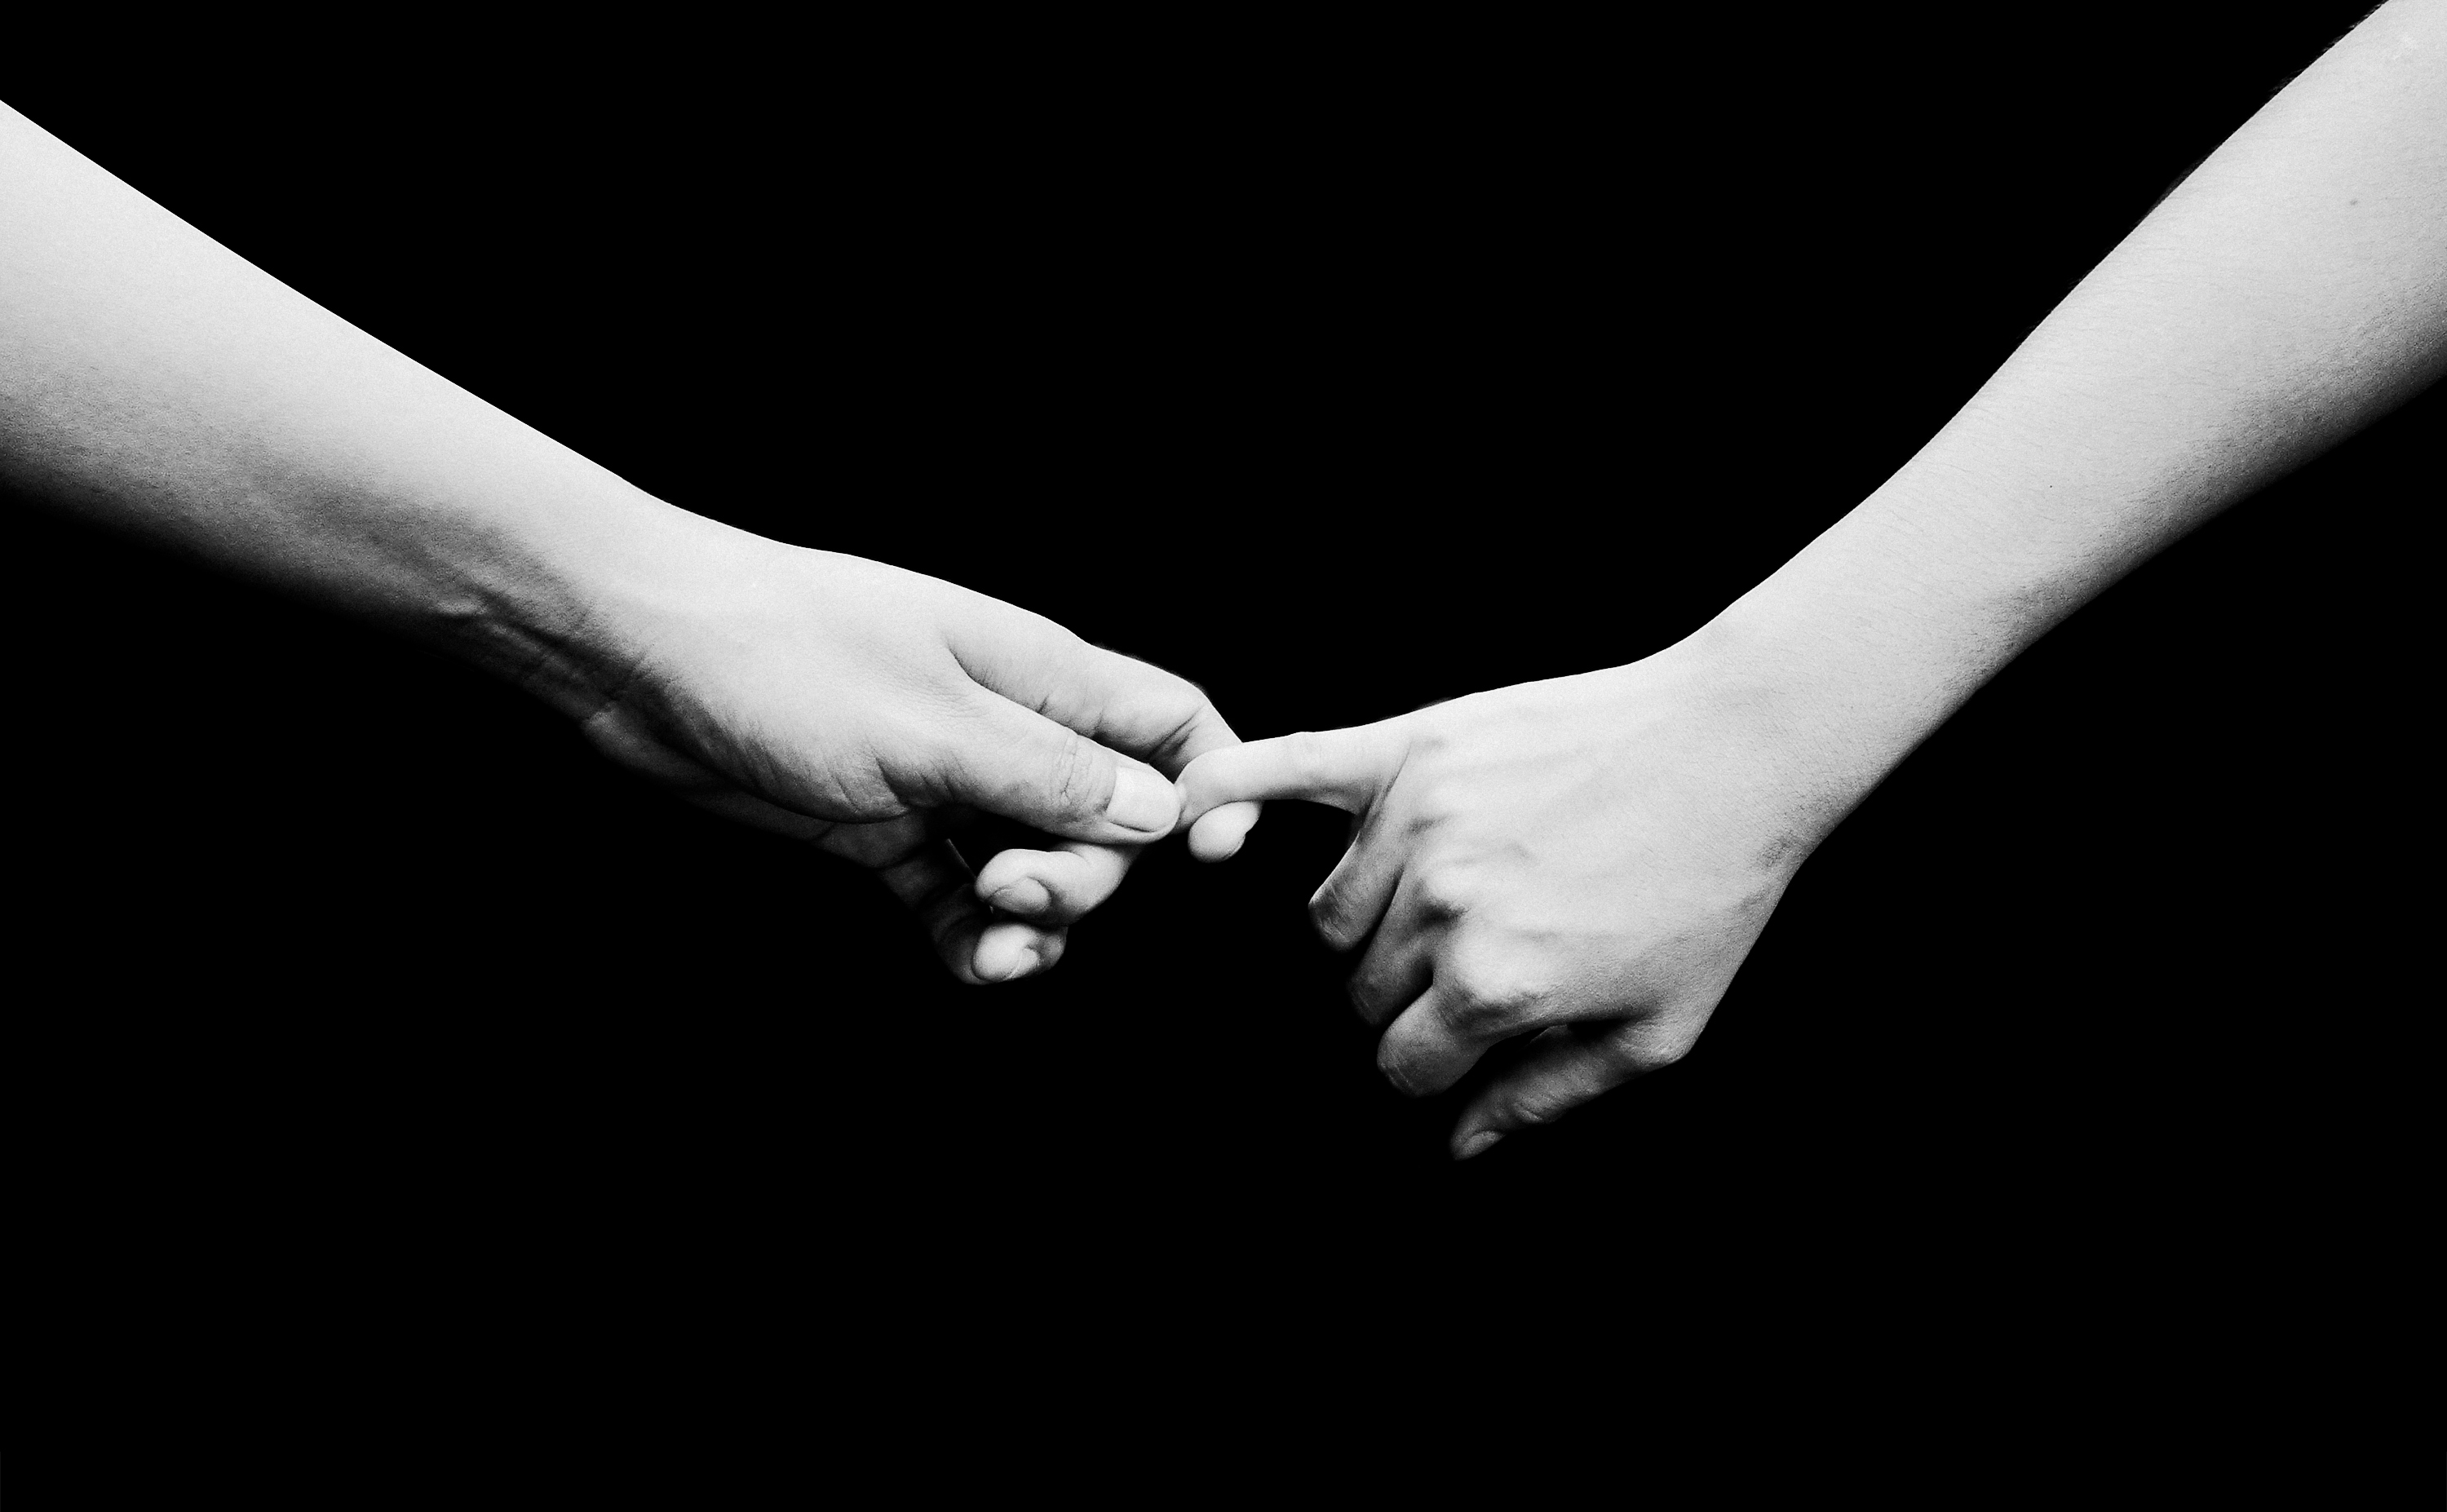 couple, love, pair, hands, bw, chb, tenderness